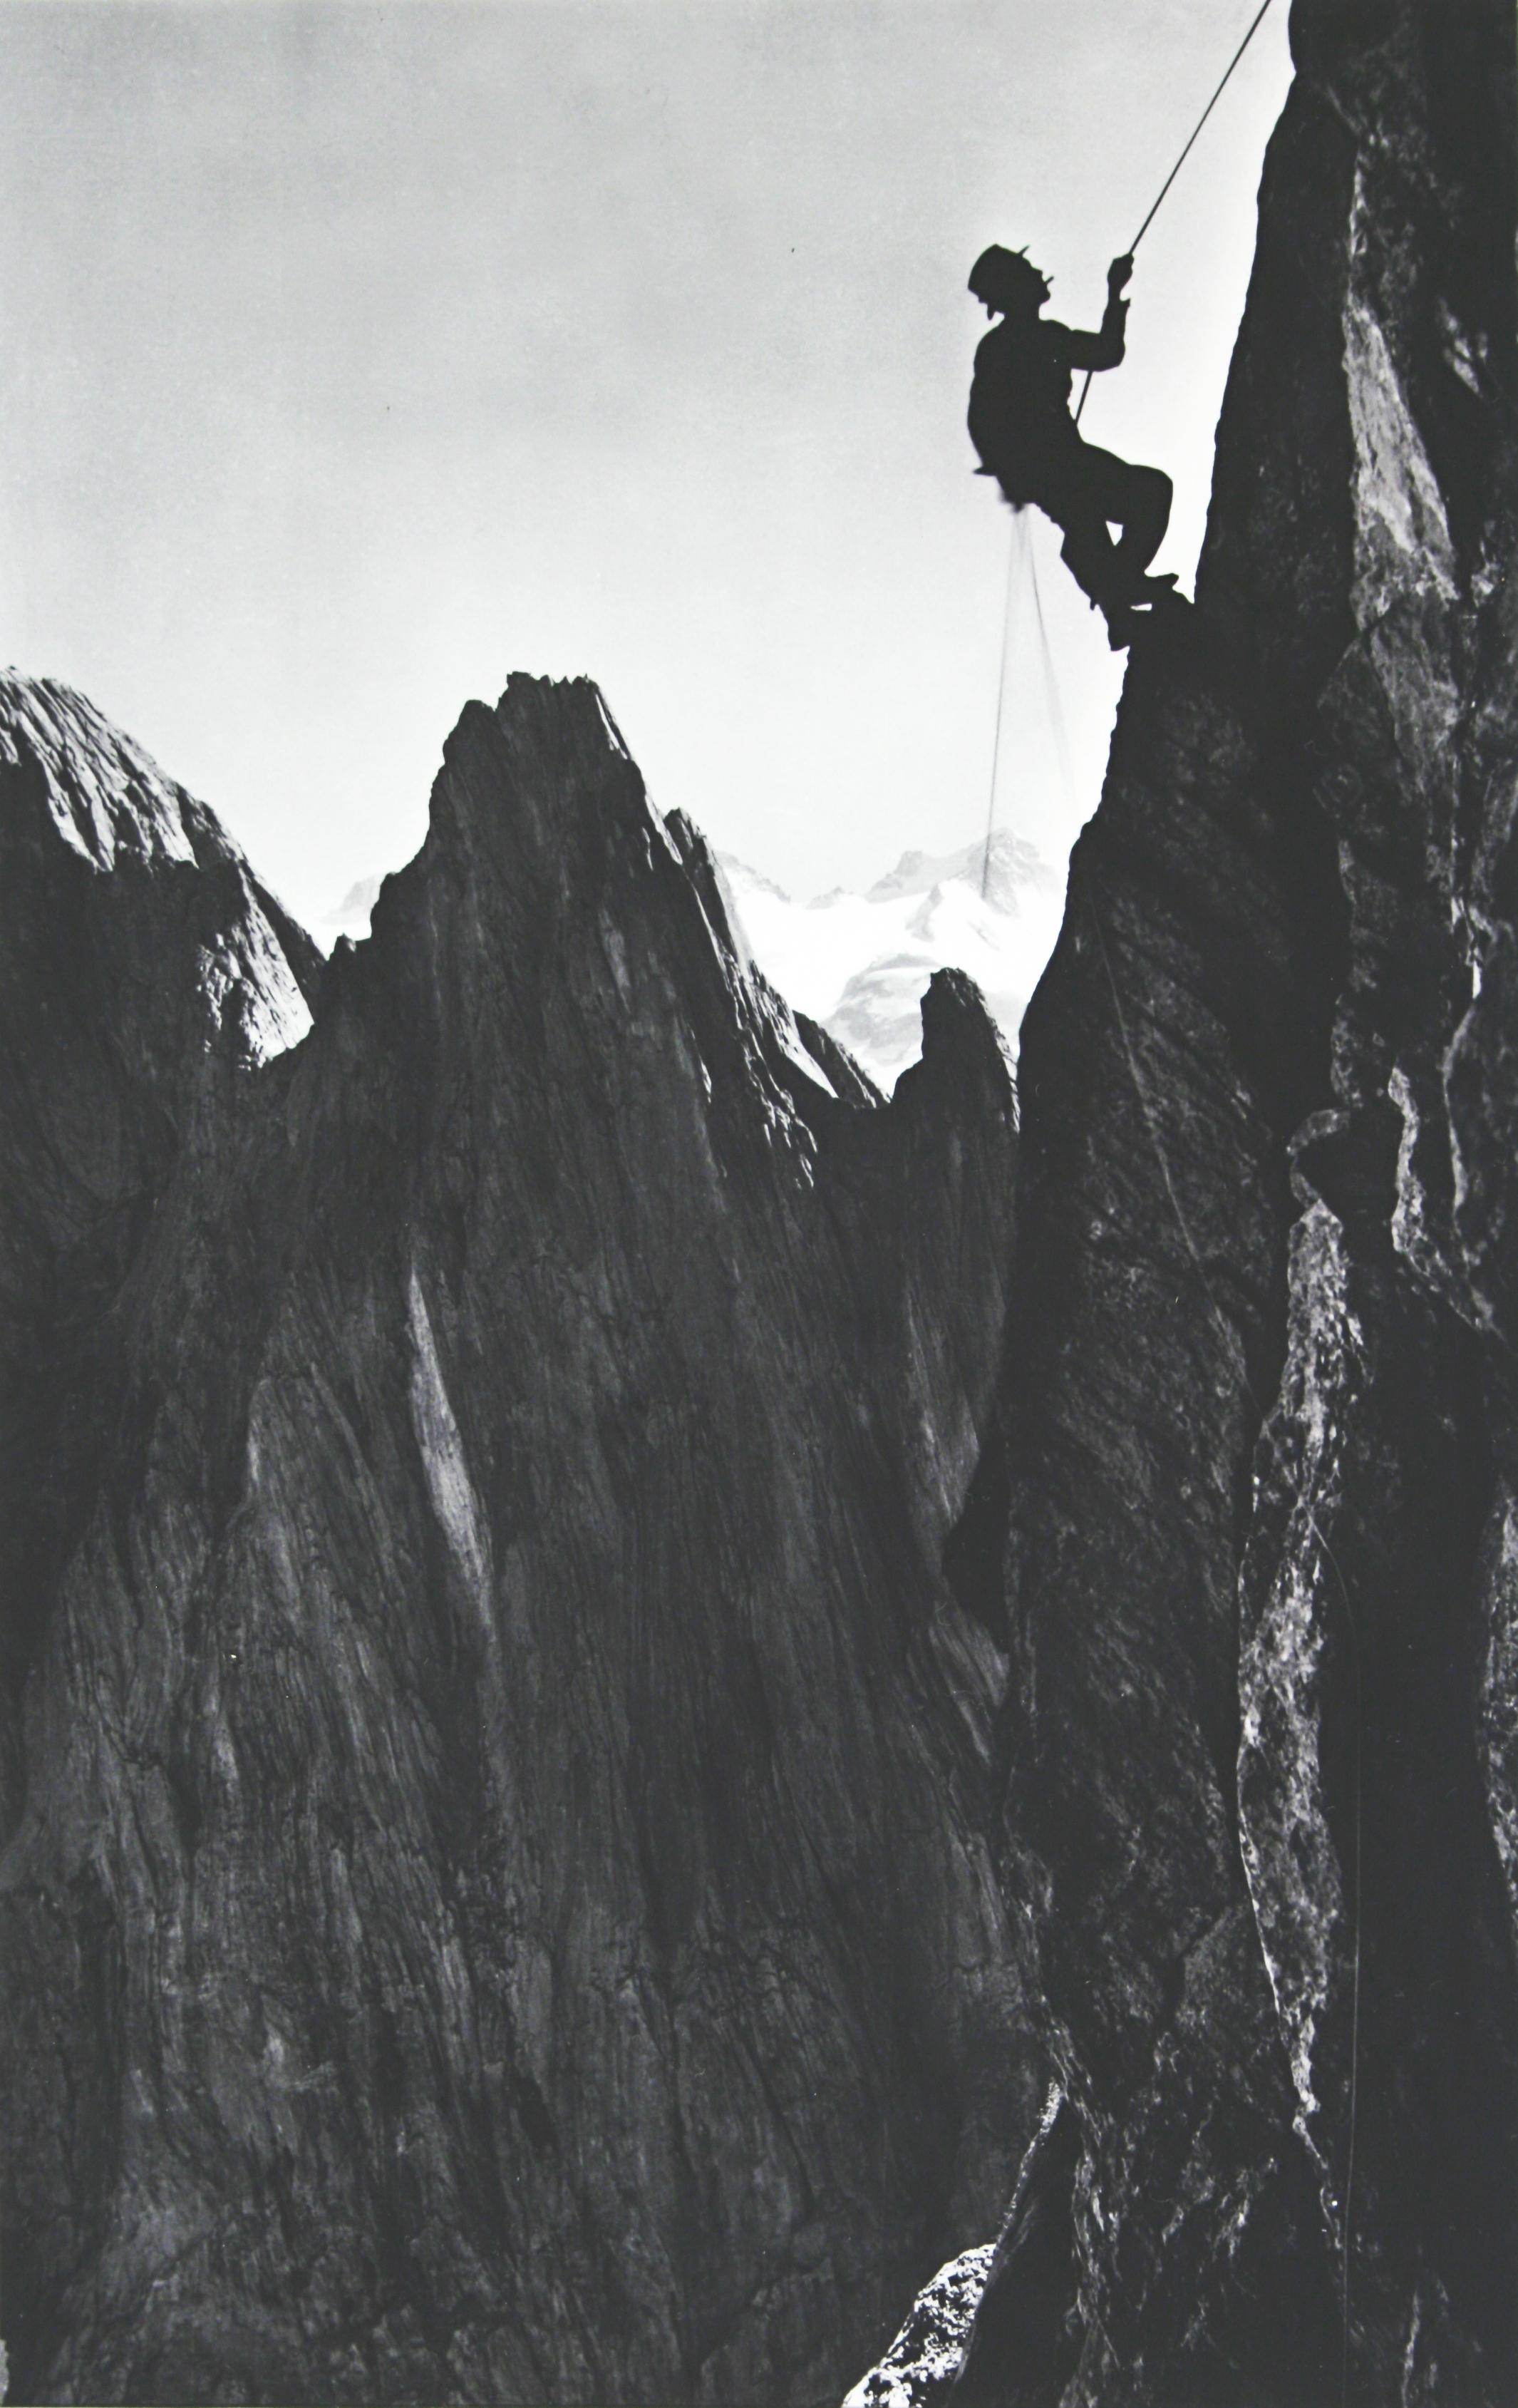 Vintage photography, antique Alpine mountaineering photograph.
'CLIMBER' Simelistock, Switzerland, a new mounted black and white photographic image after an original 1930s mountaineering photograph. Black and white alpine photos are the perfect